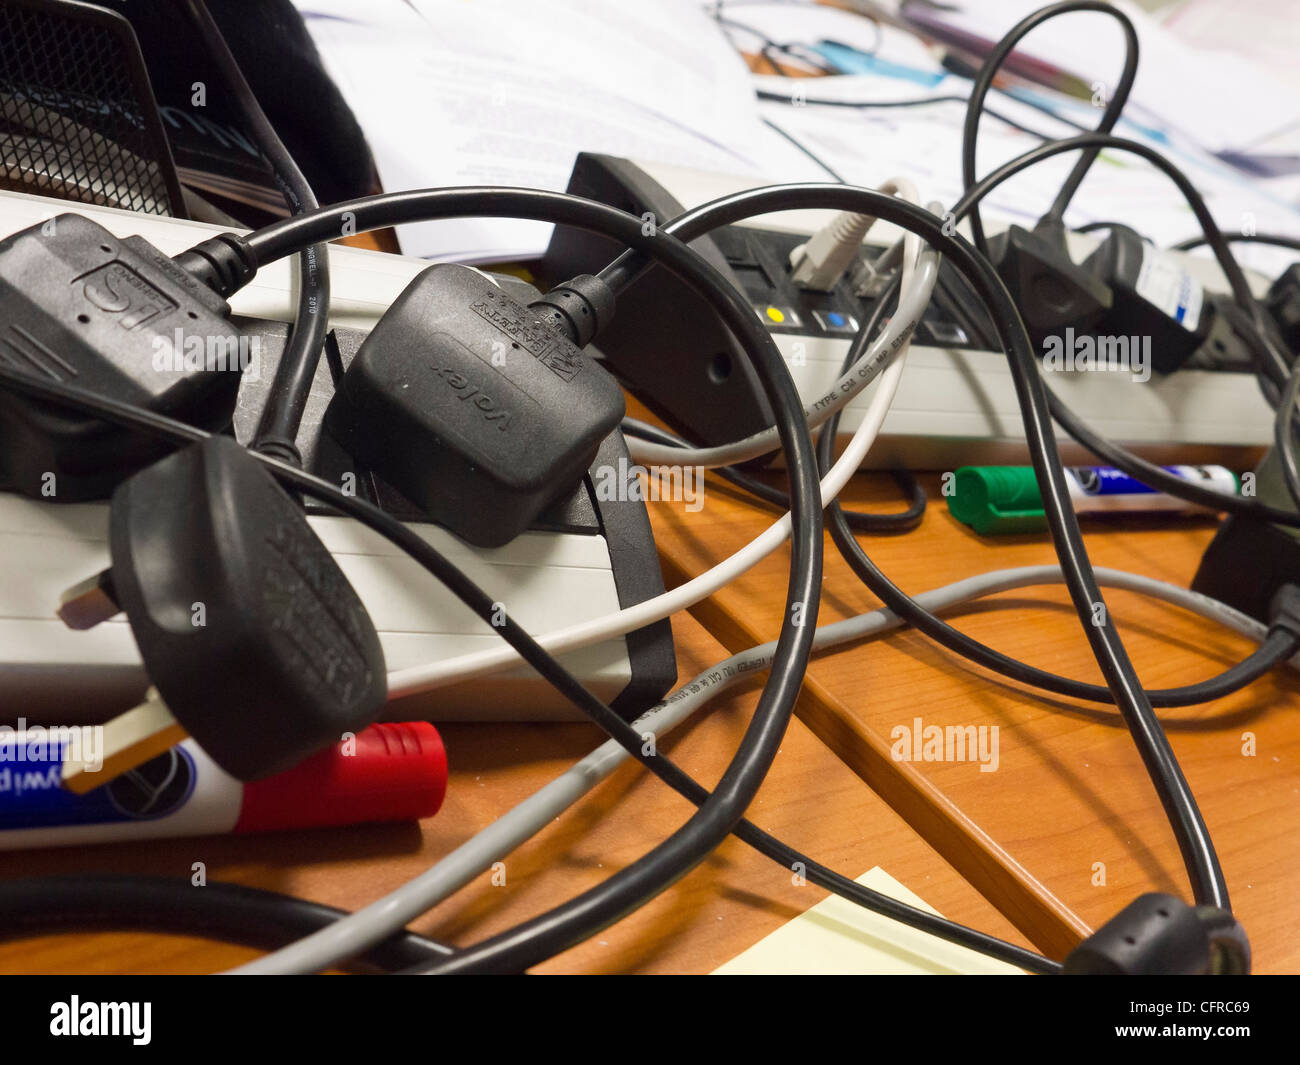 Tangle of computer wires, cables and plugs on an untidy office desk. Stock Photo